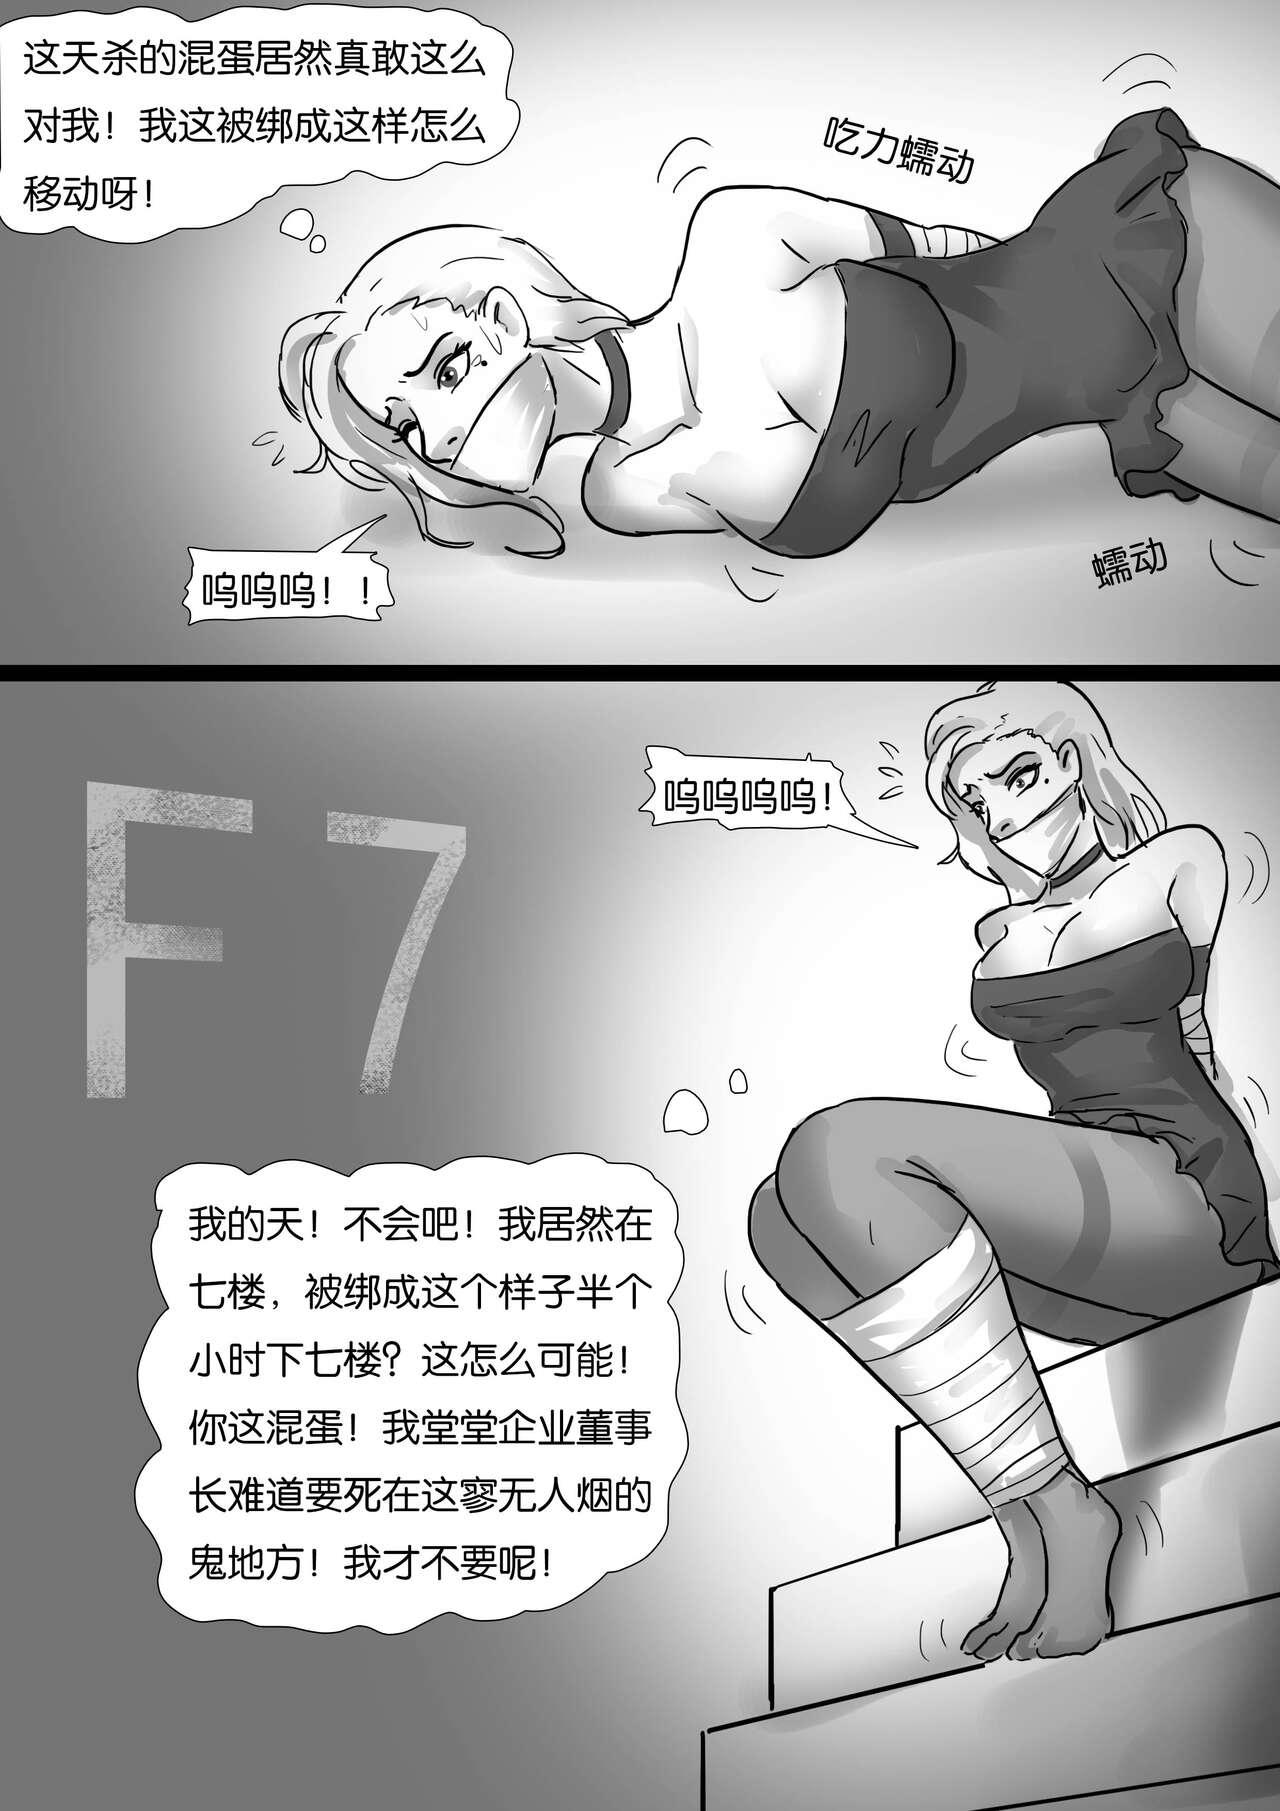 Climax 生死时速 Time Chacing Porno Amateur - Page 8